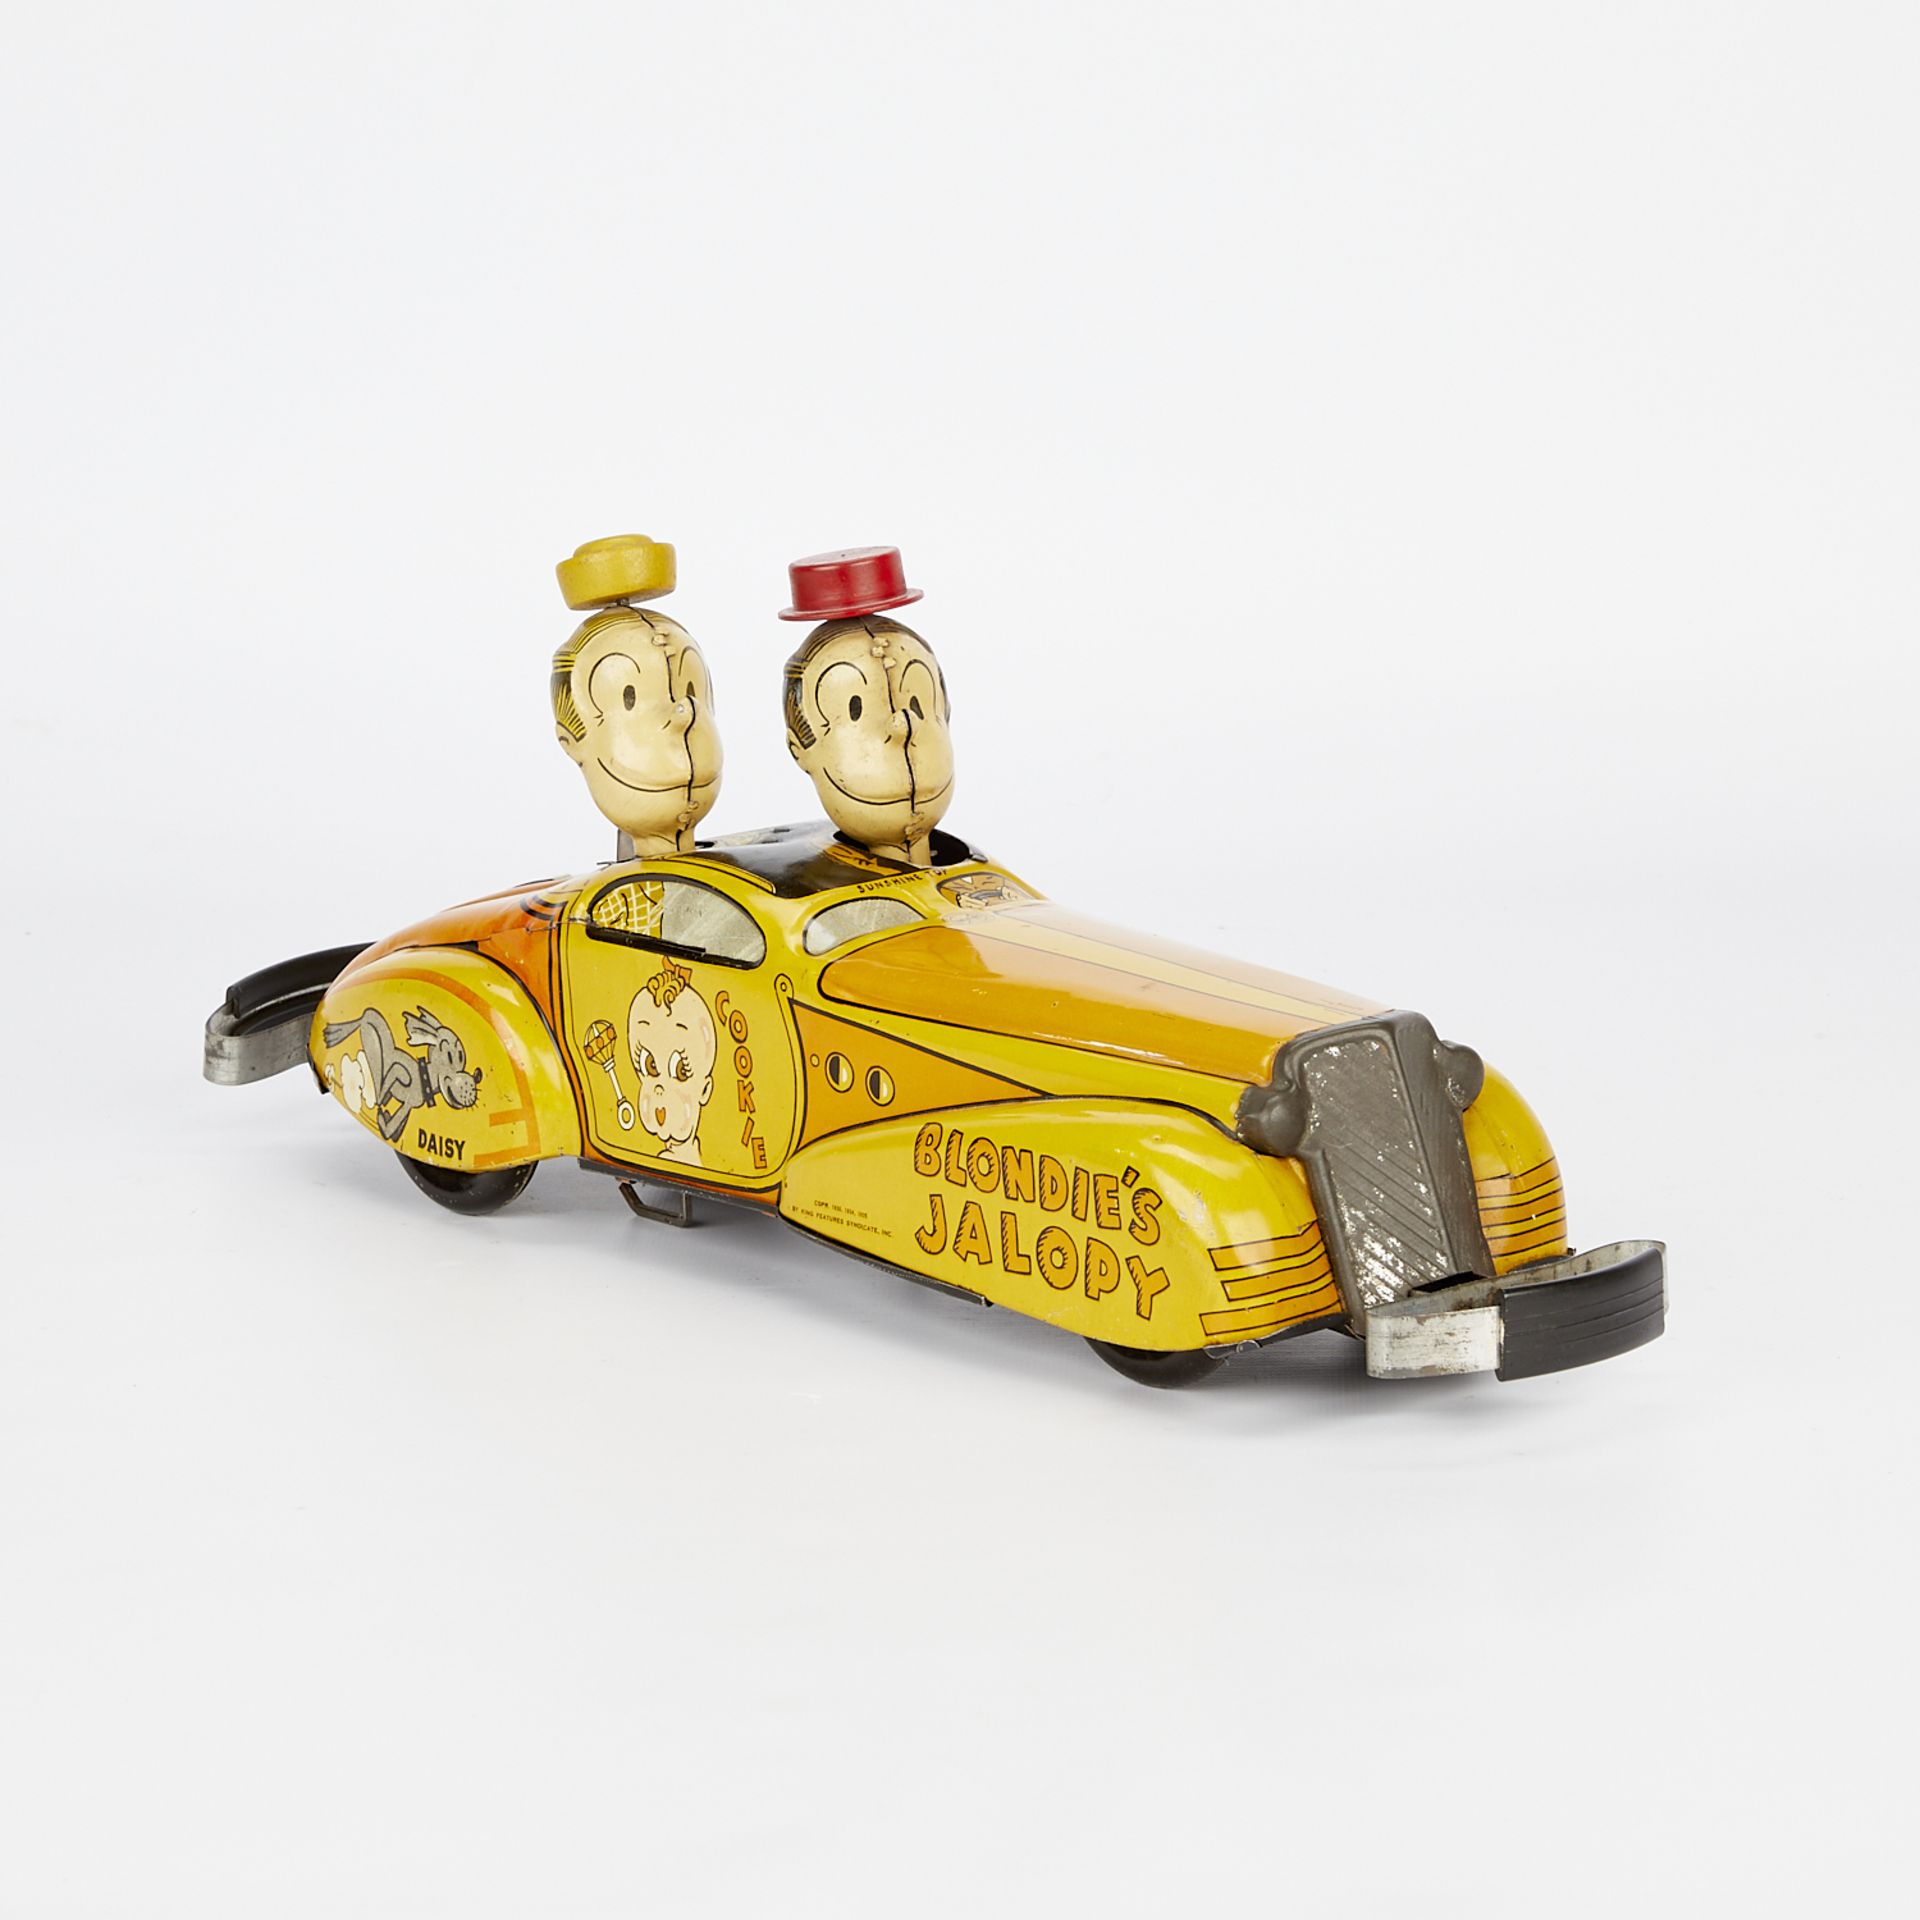 Marx Lithographed Tin Wind-Up Blondie's Jalopy Toy